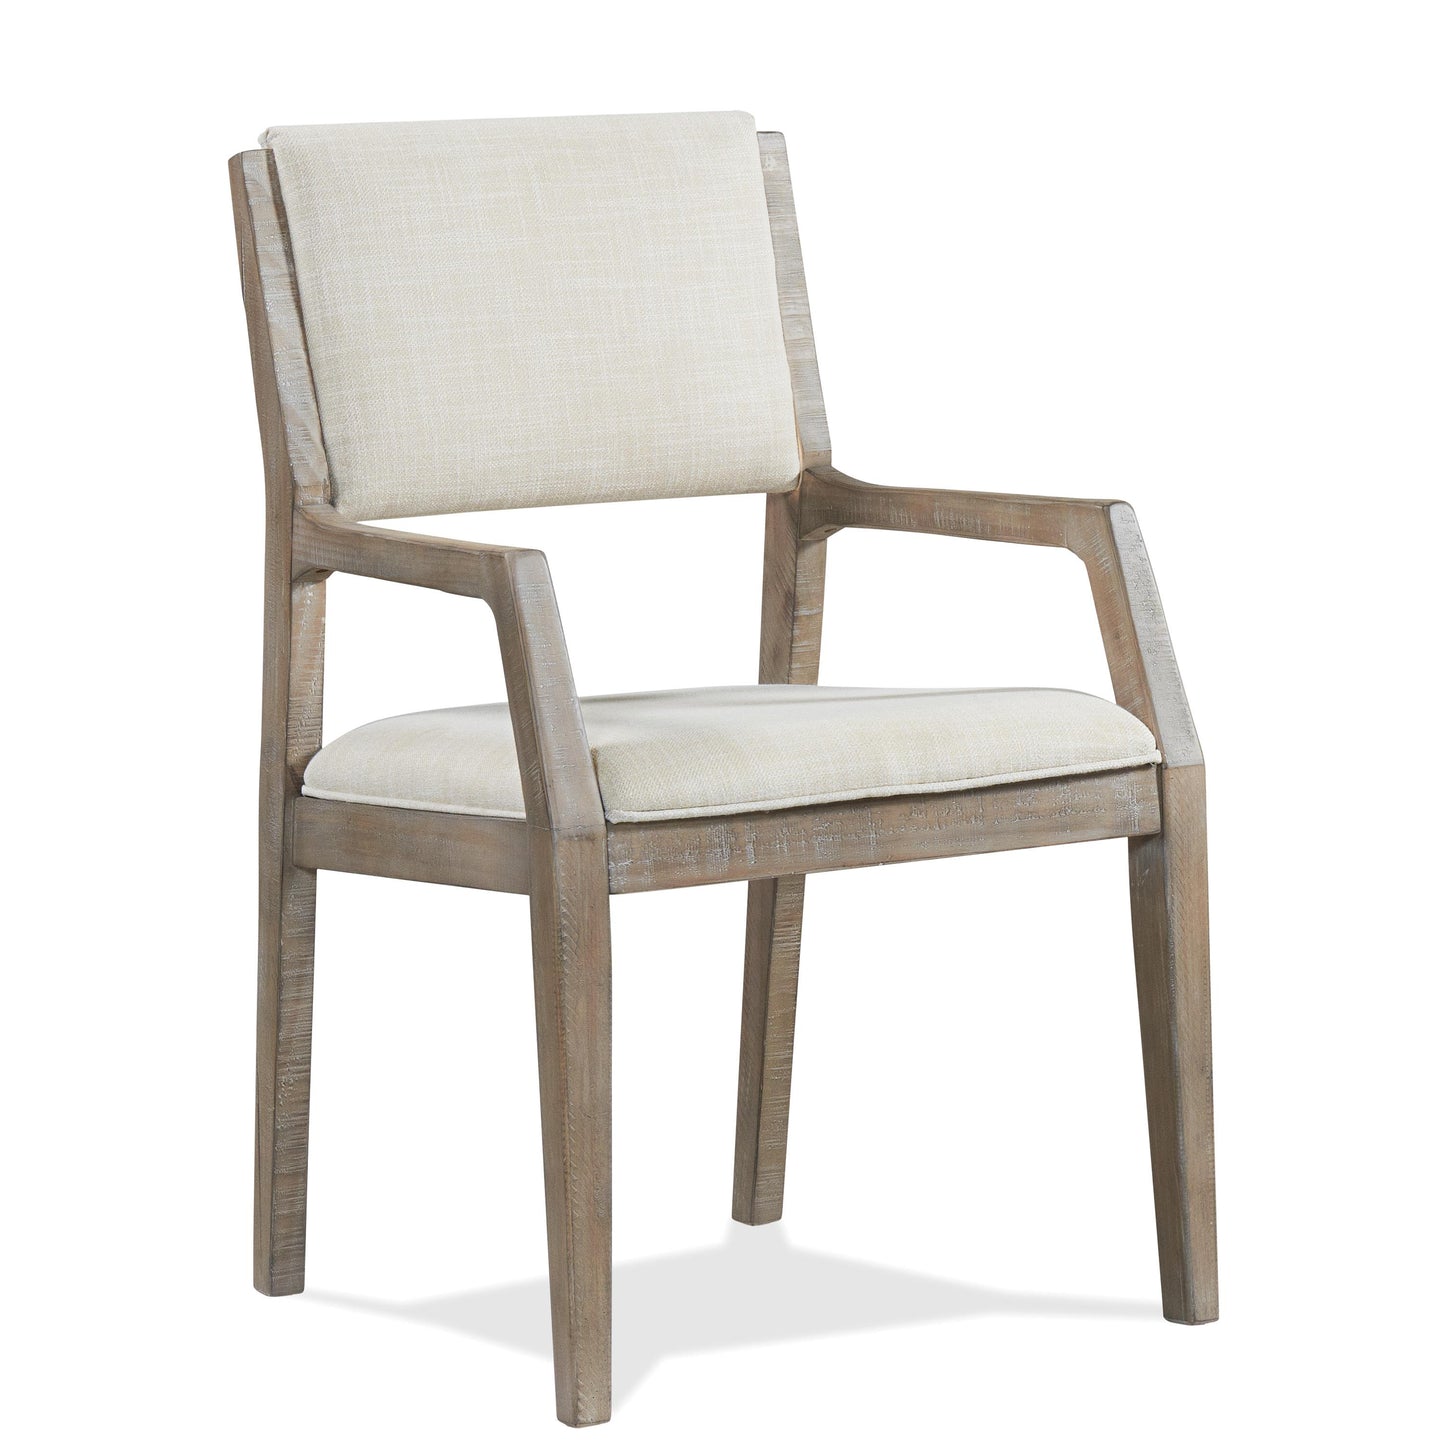 Intrigue Uph Arm Chair